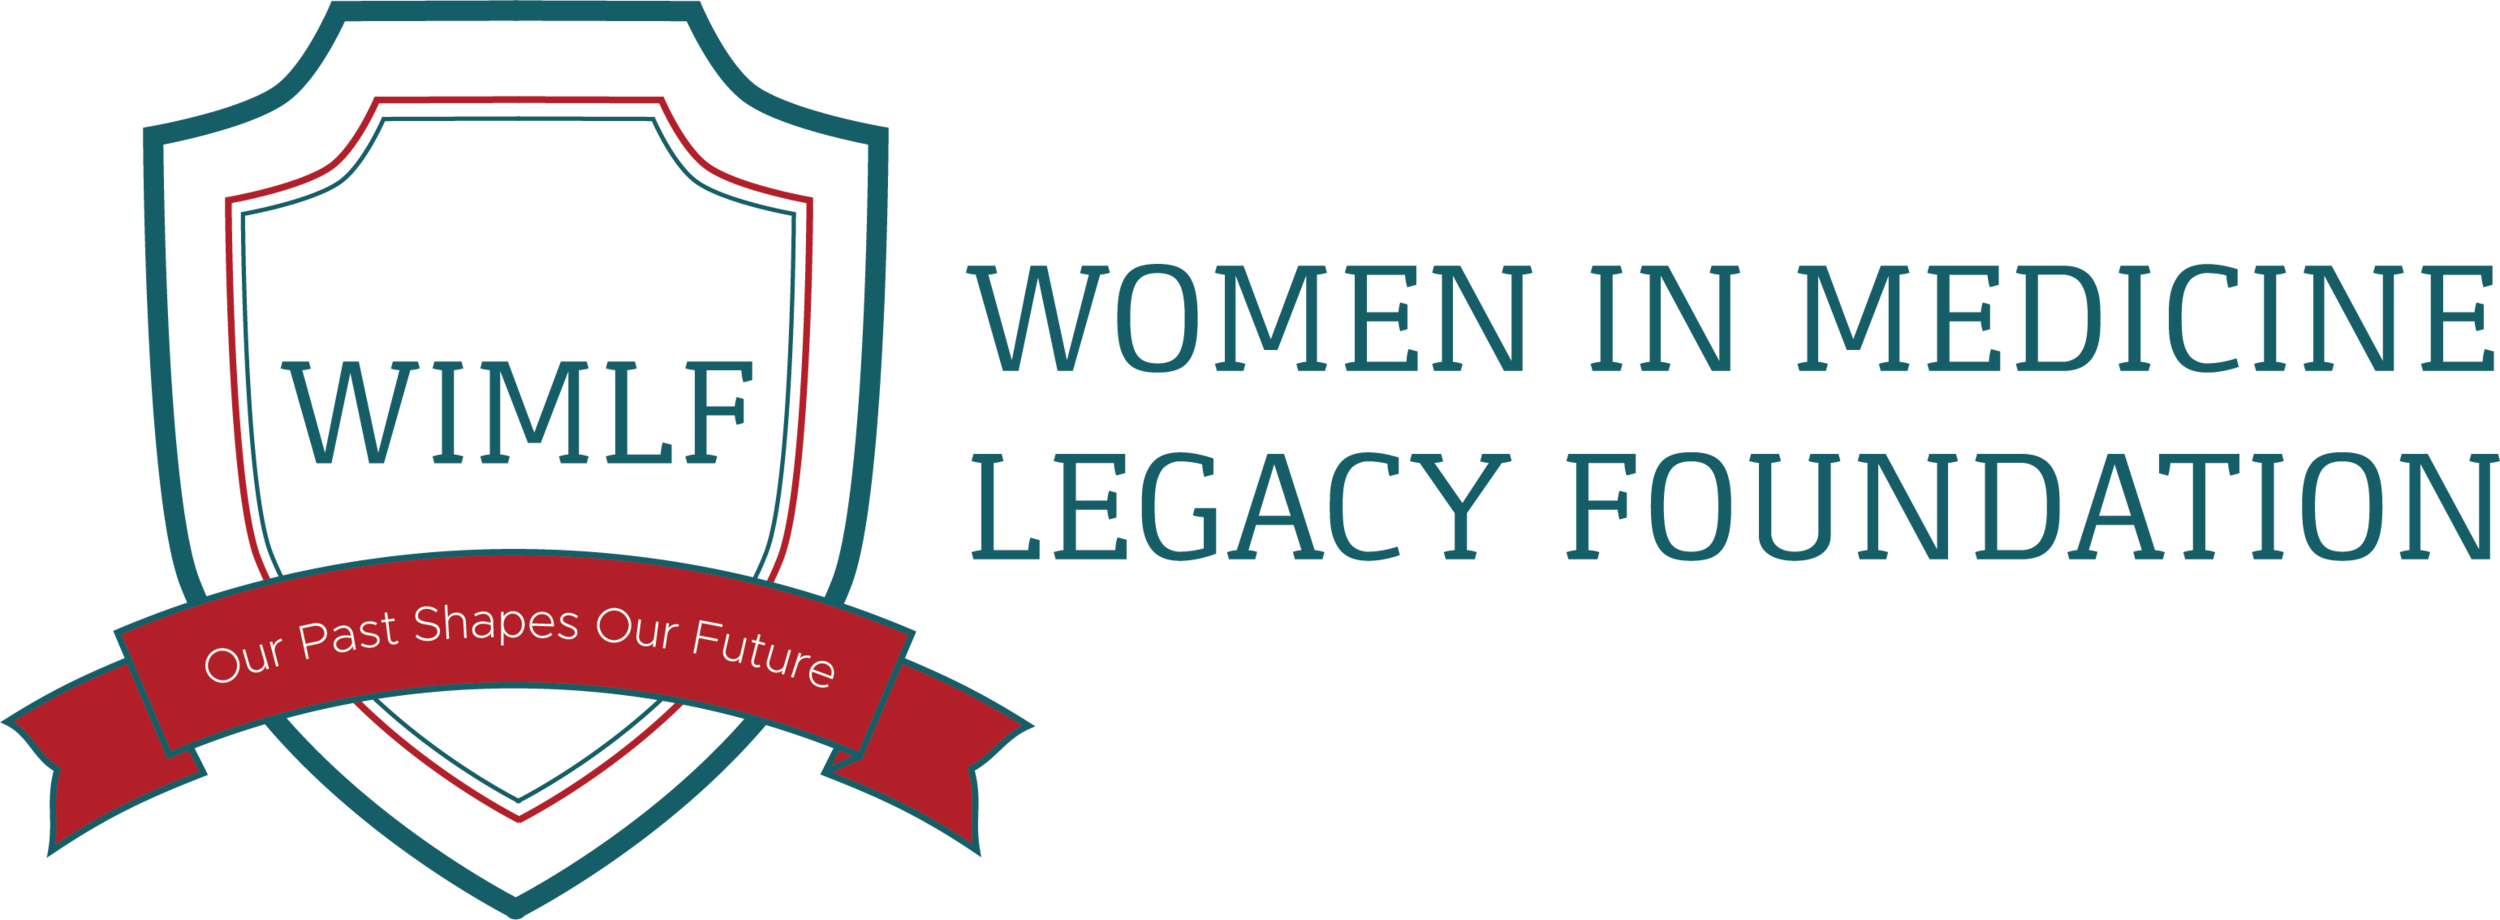 The Women in Medicine Legacy Foundation